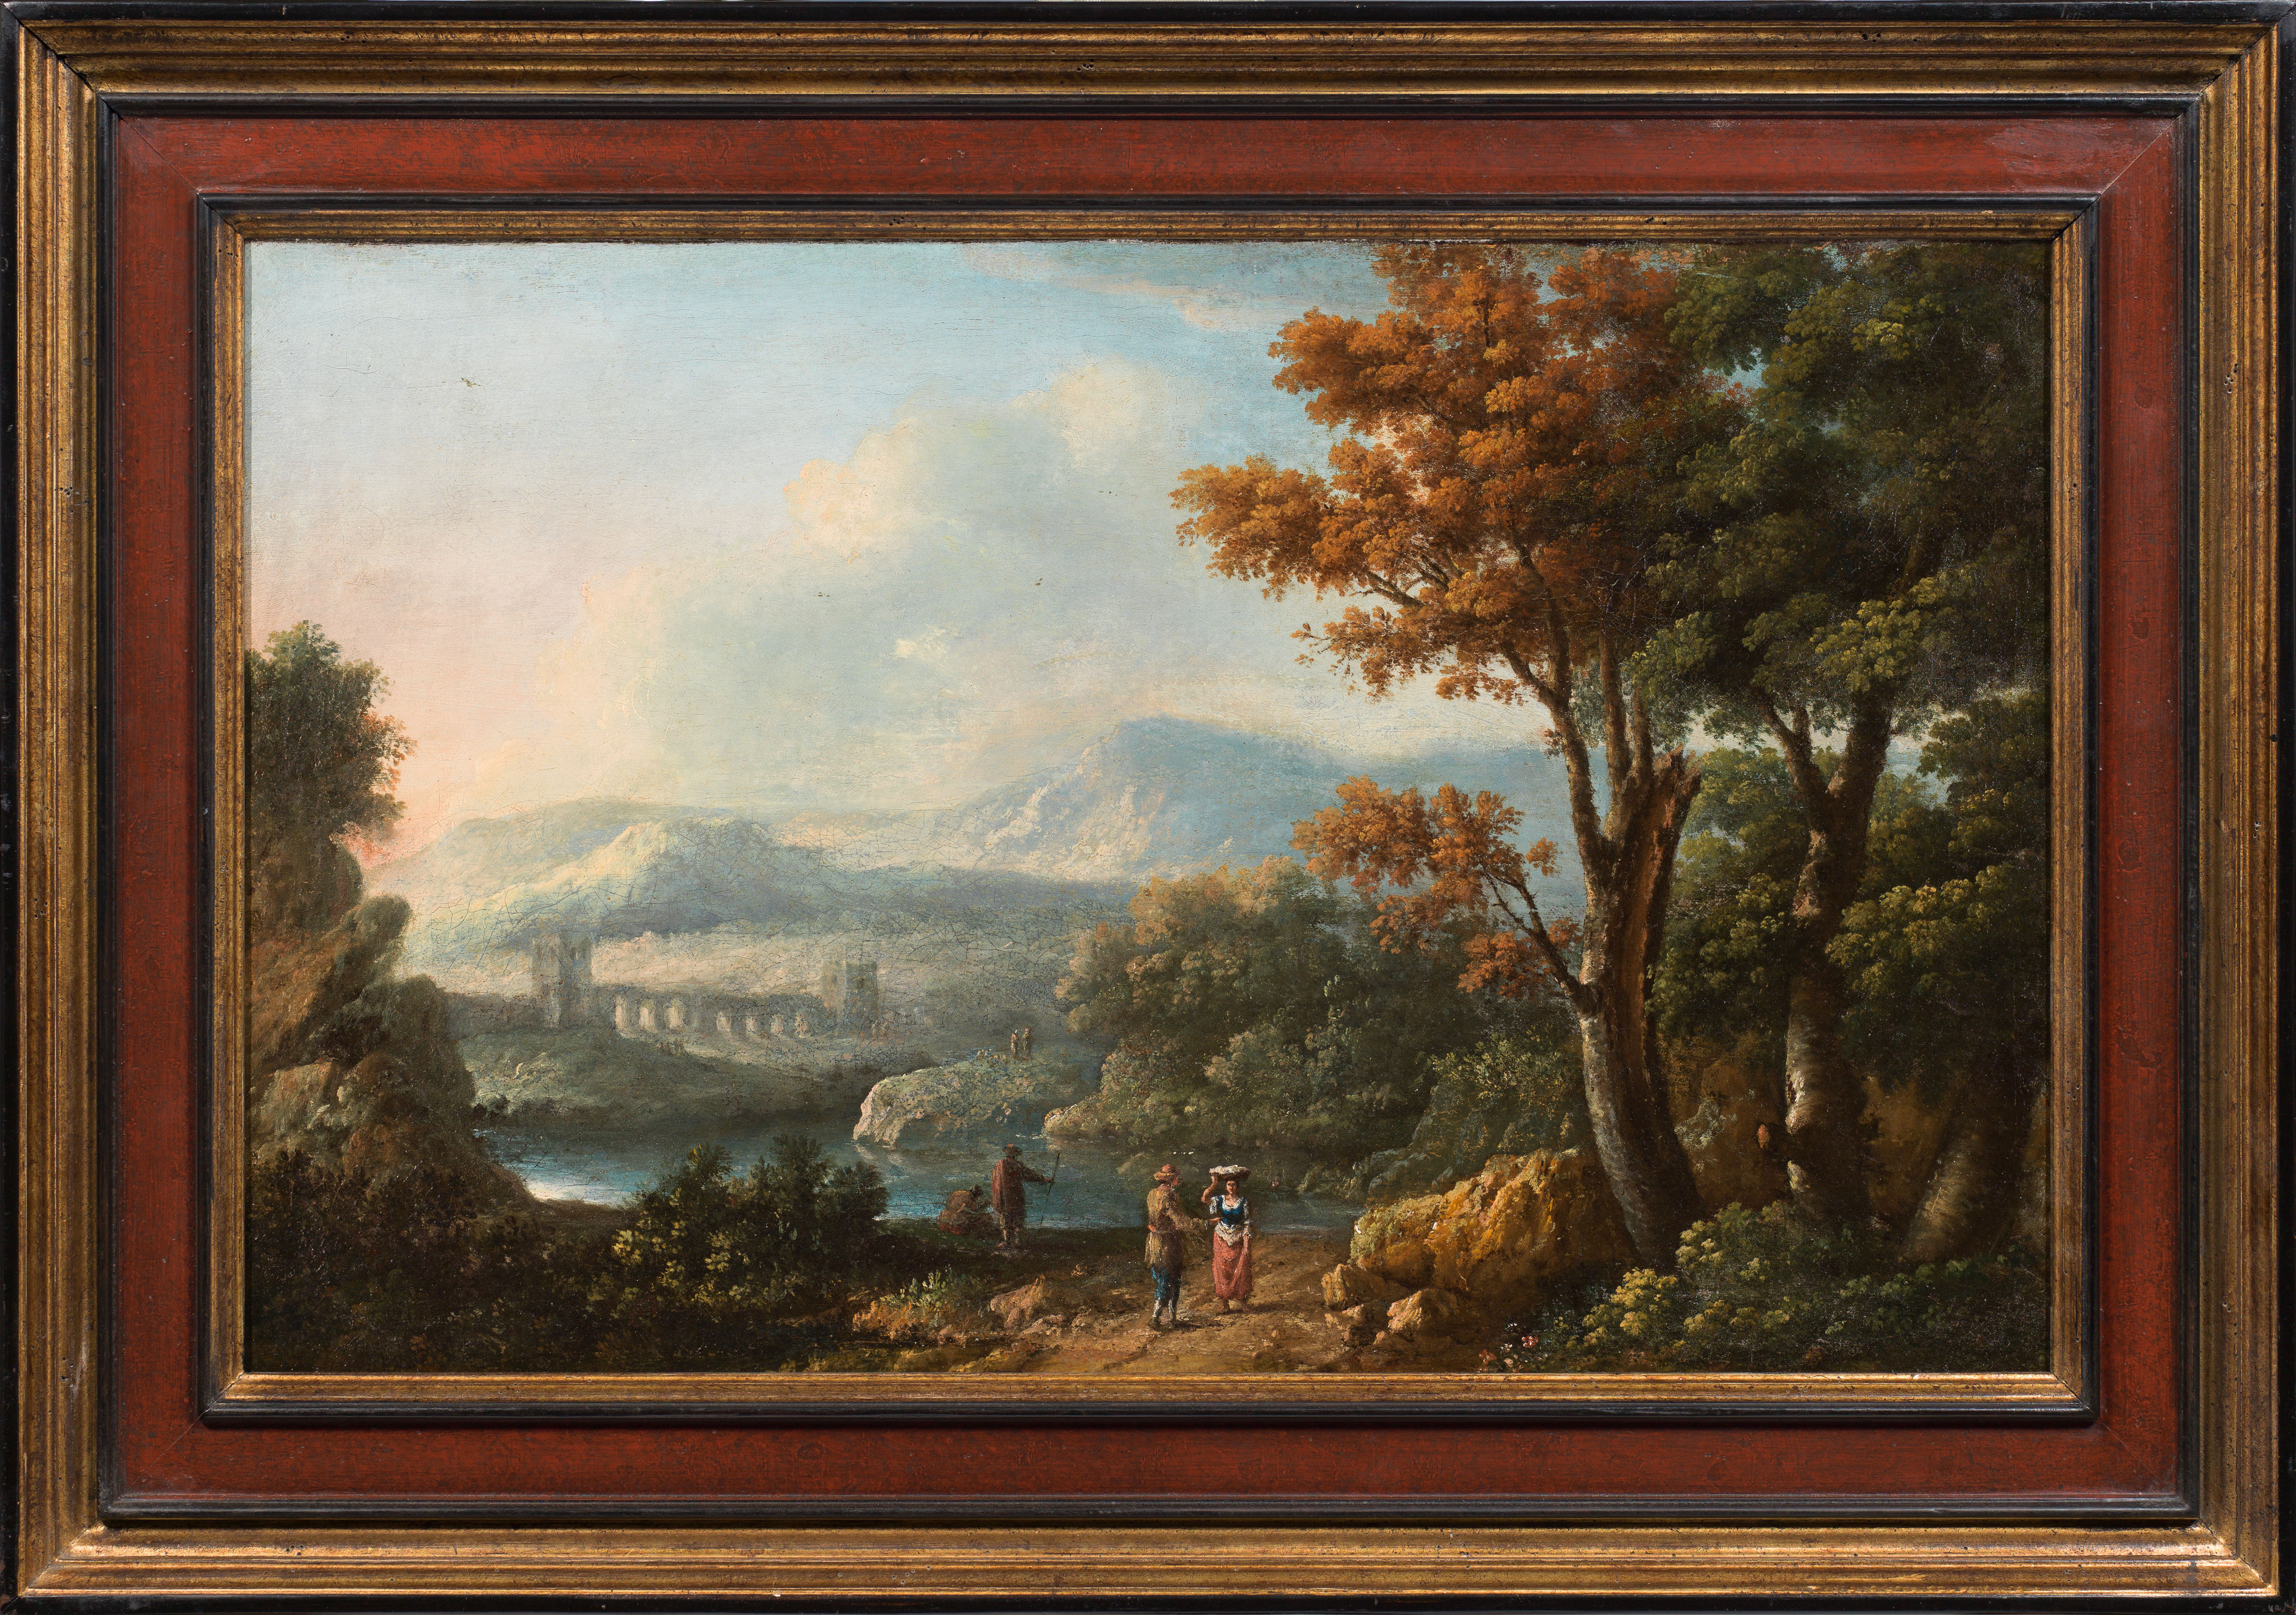 Italian School: Hiker and countrywoman in a southern landscape - Image 2 of 2